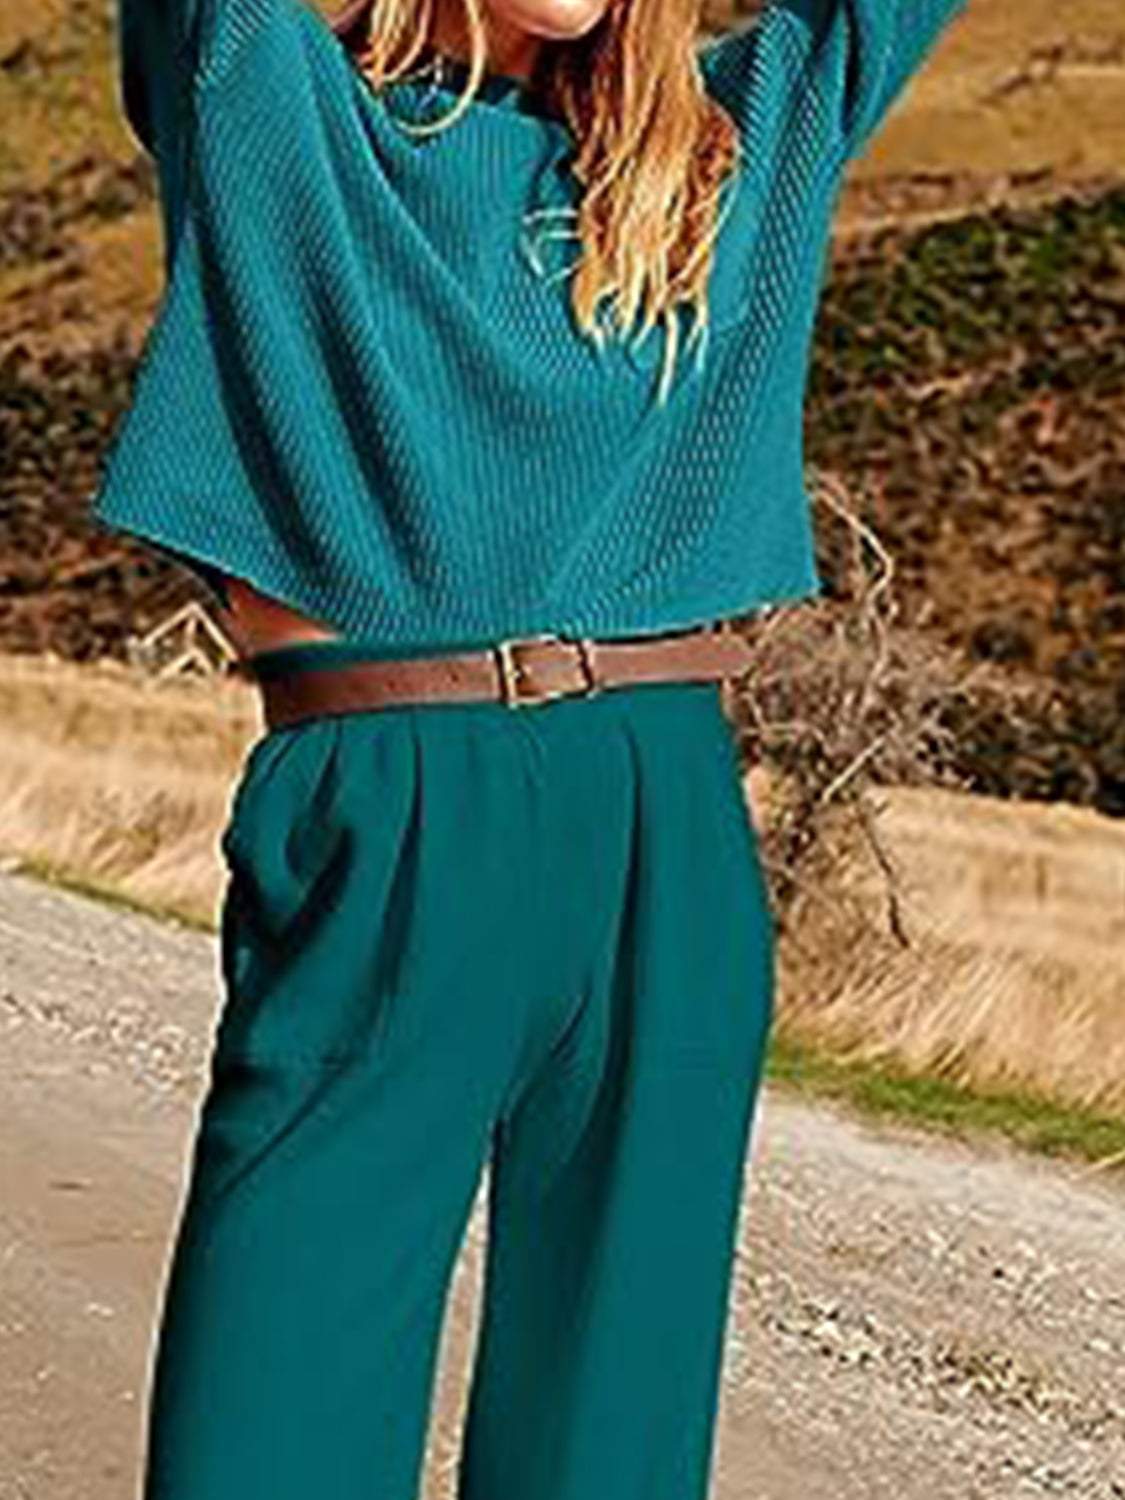 A Knit Top and Joggers Outift Set